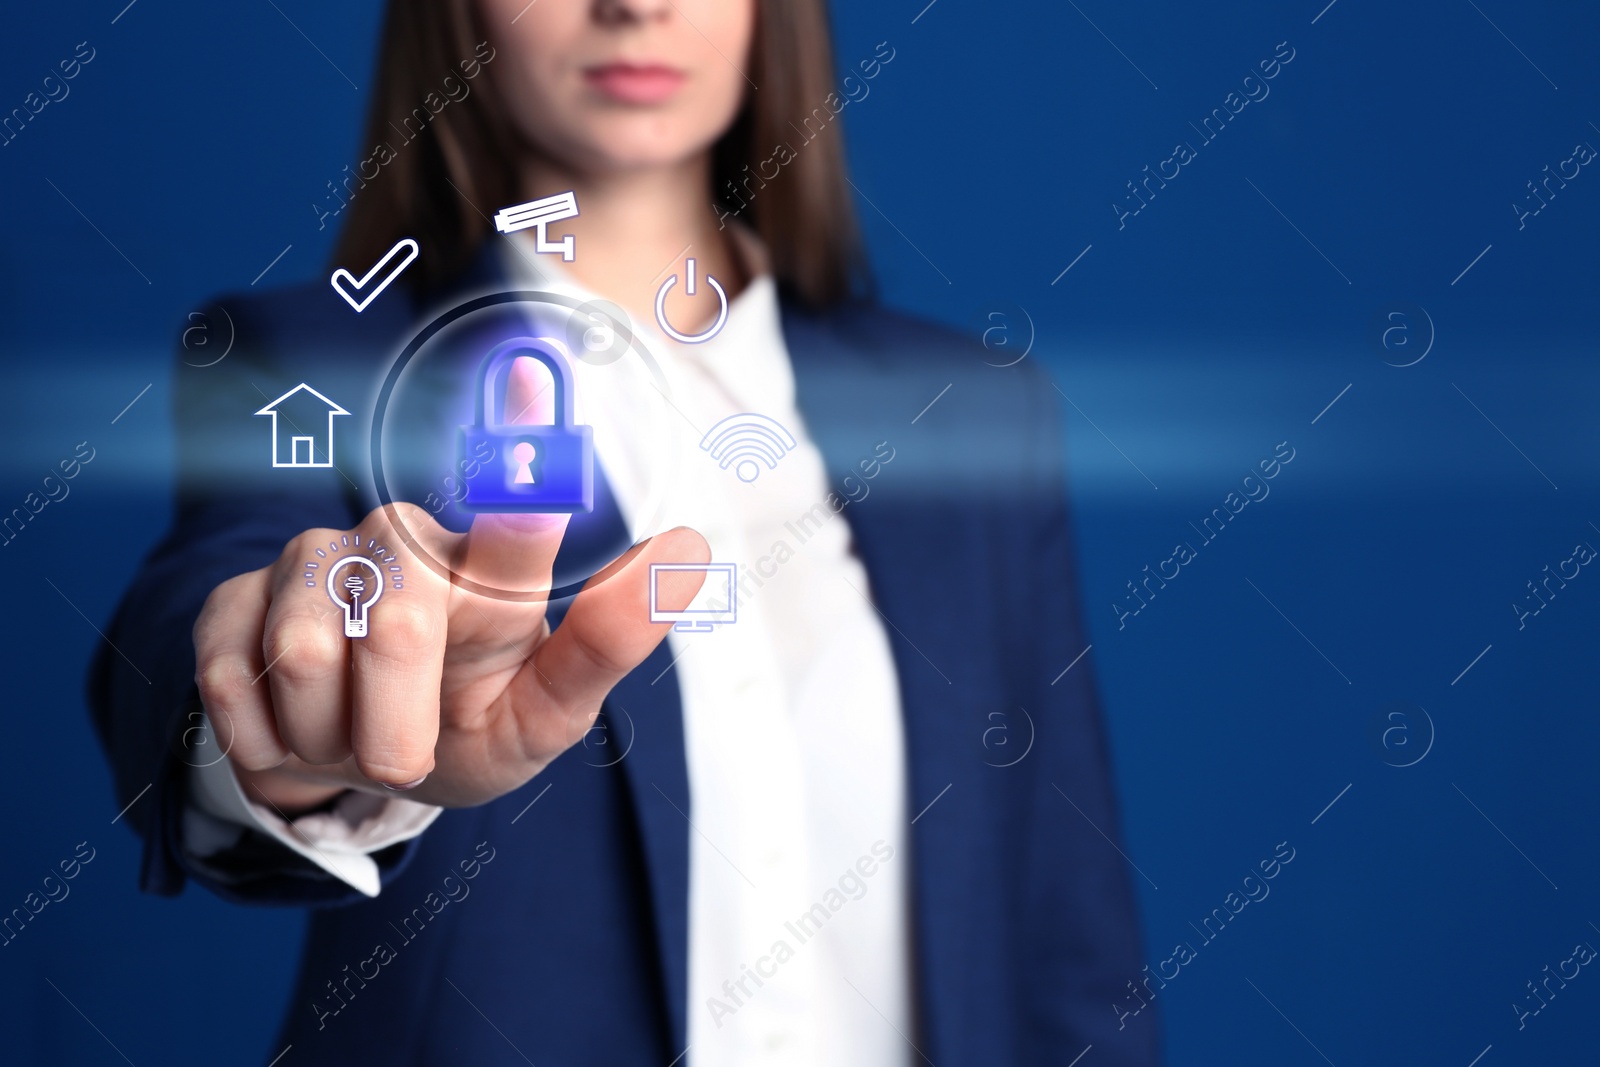 Image of Home security concept. Woman touching digital lock symbol, closeup